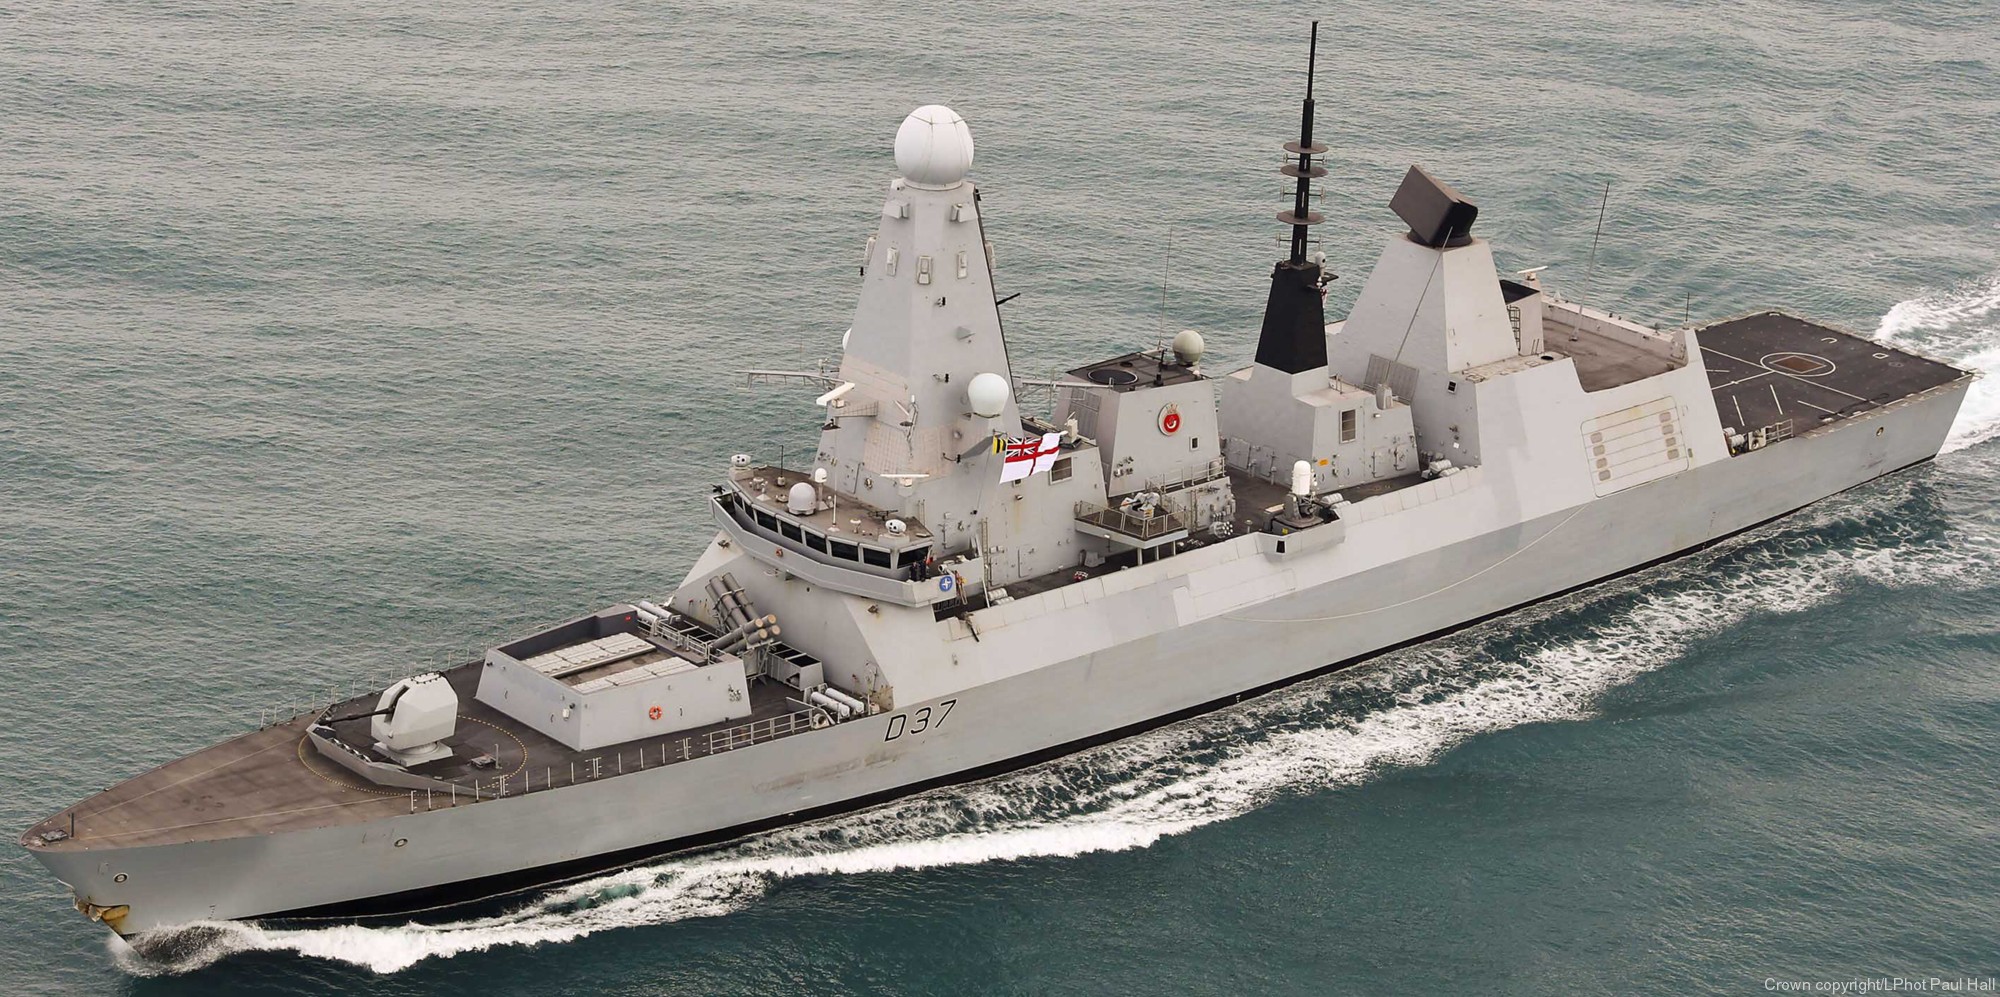 hms duncan d-37 type 45 daring class guided missile destroyer ddg royal navy sea viper paams 27